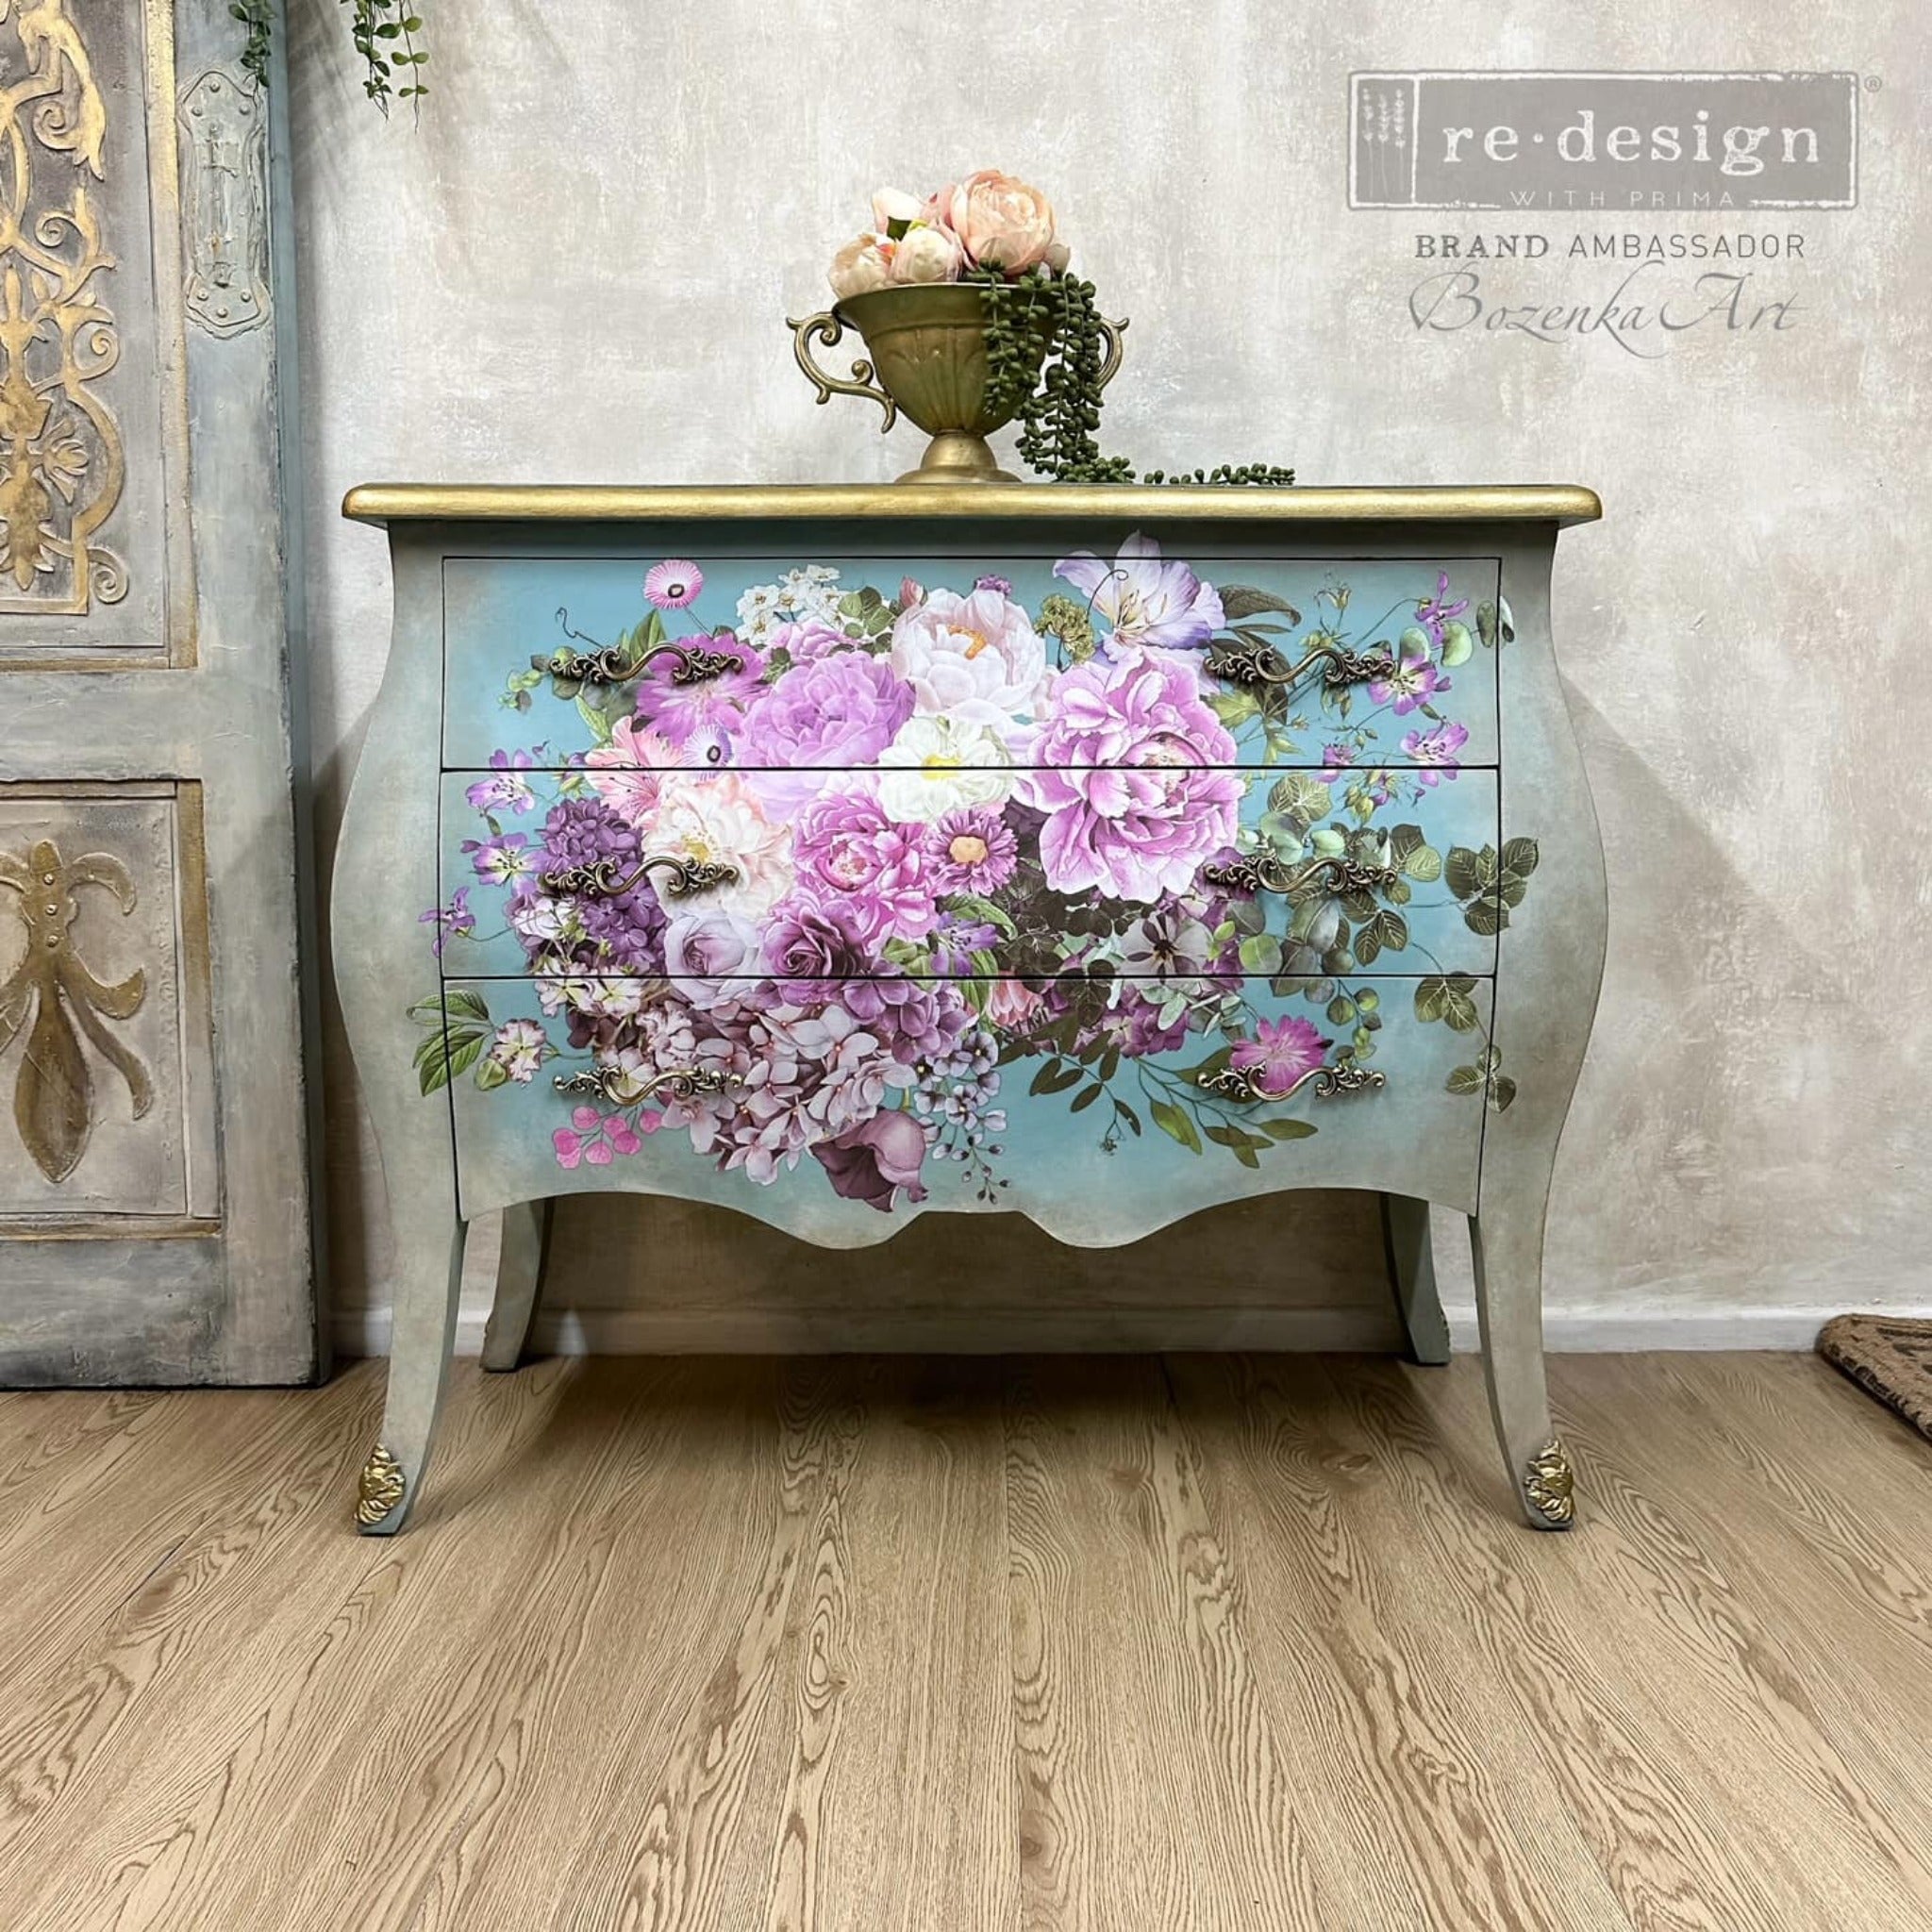 A vintage Bombay style dresser refurbished by Bozenka Art is painted a mottled grey with a sky blue ombre center and features ReDesign with Prima's Kacha Morning Purple transfer on its drawers.